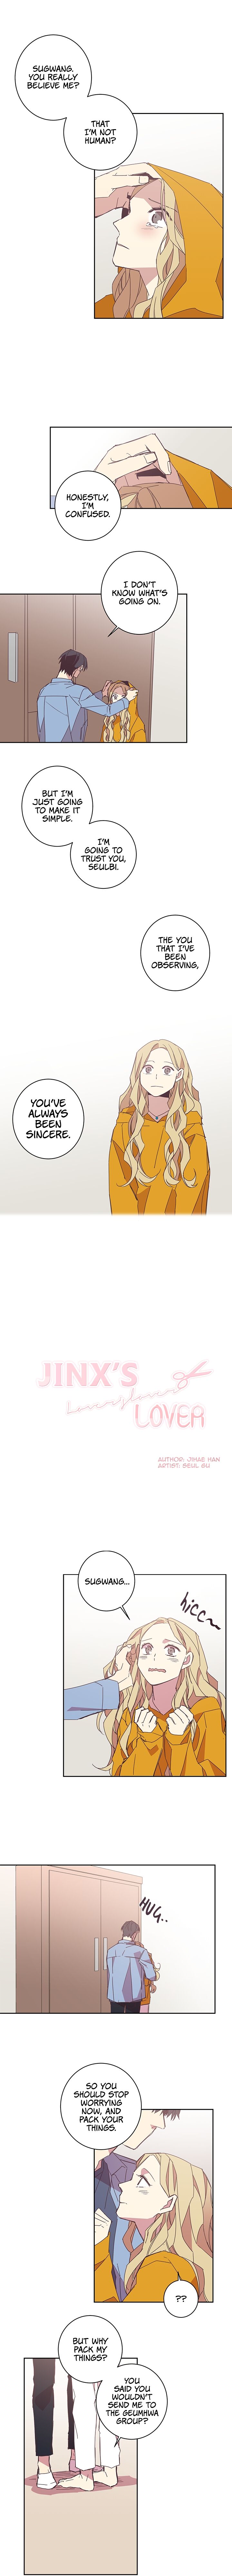 The Jinx's Lover ch.061